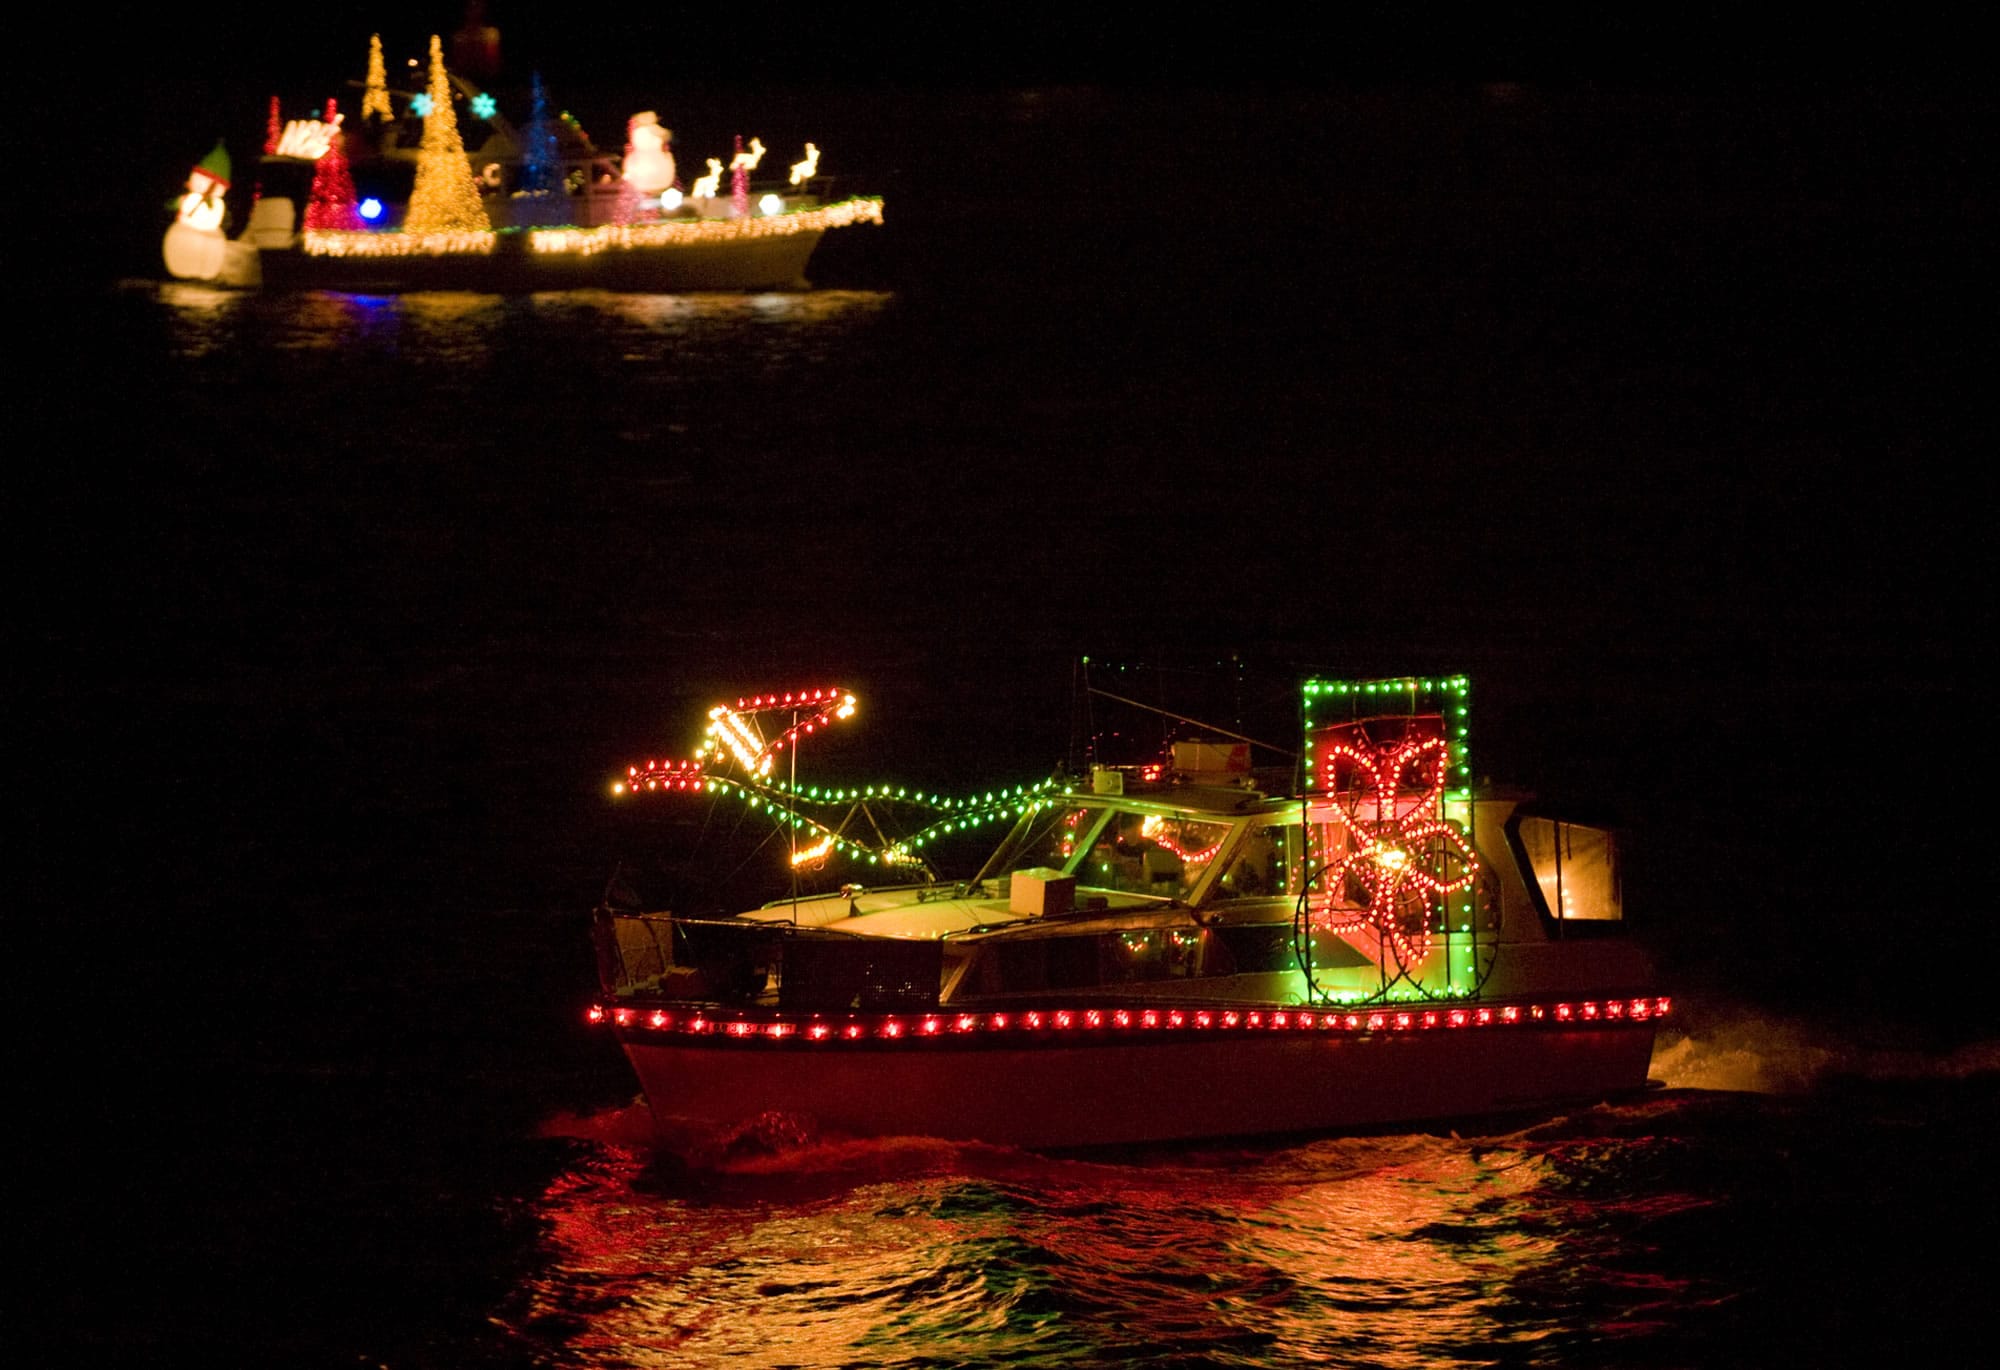 According to the website, the Christmas Ship Fleet averages about 55 to 60 boats between the two Columbia and Willamette River fleets.